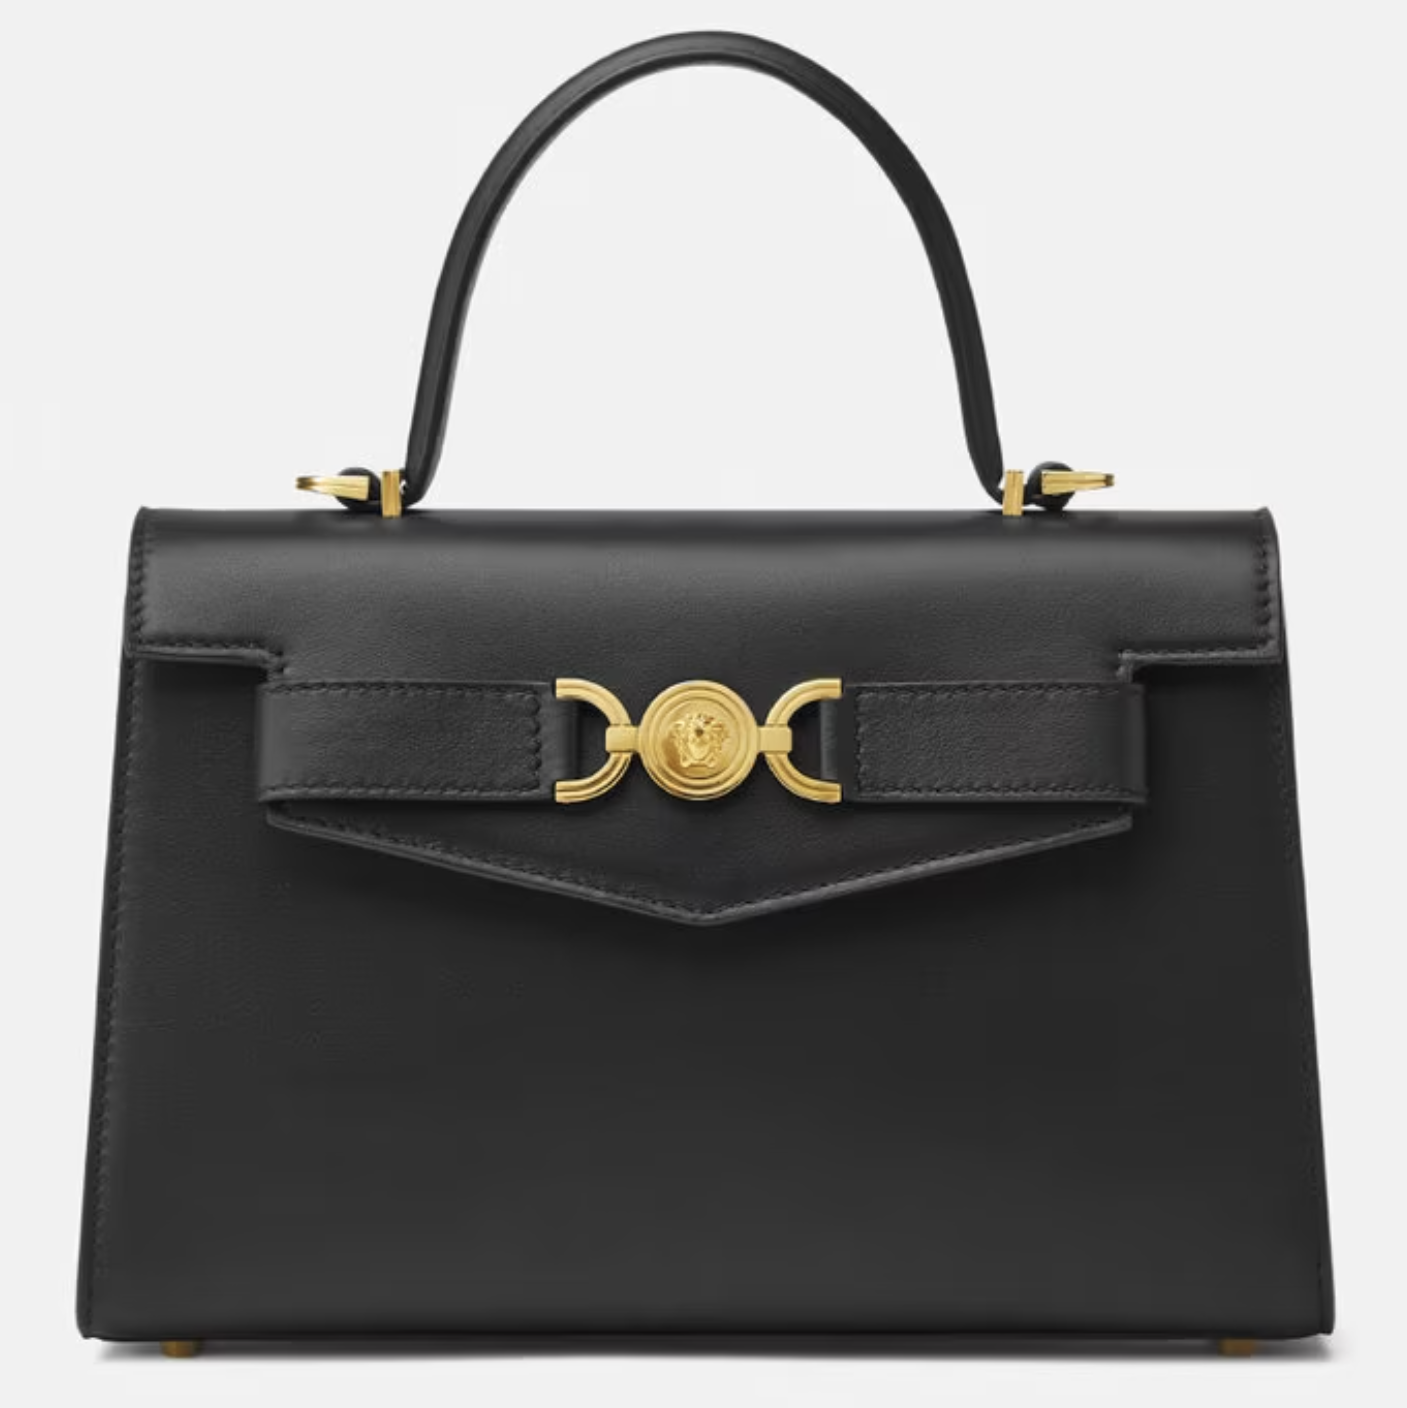 An elegant black designer handbag with gold hardware accents, featuring a prominent front clasp.